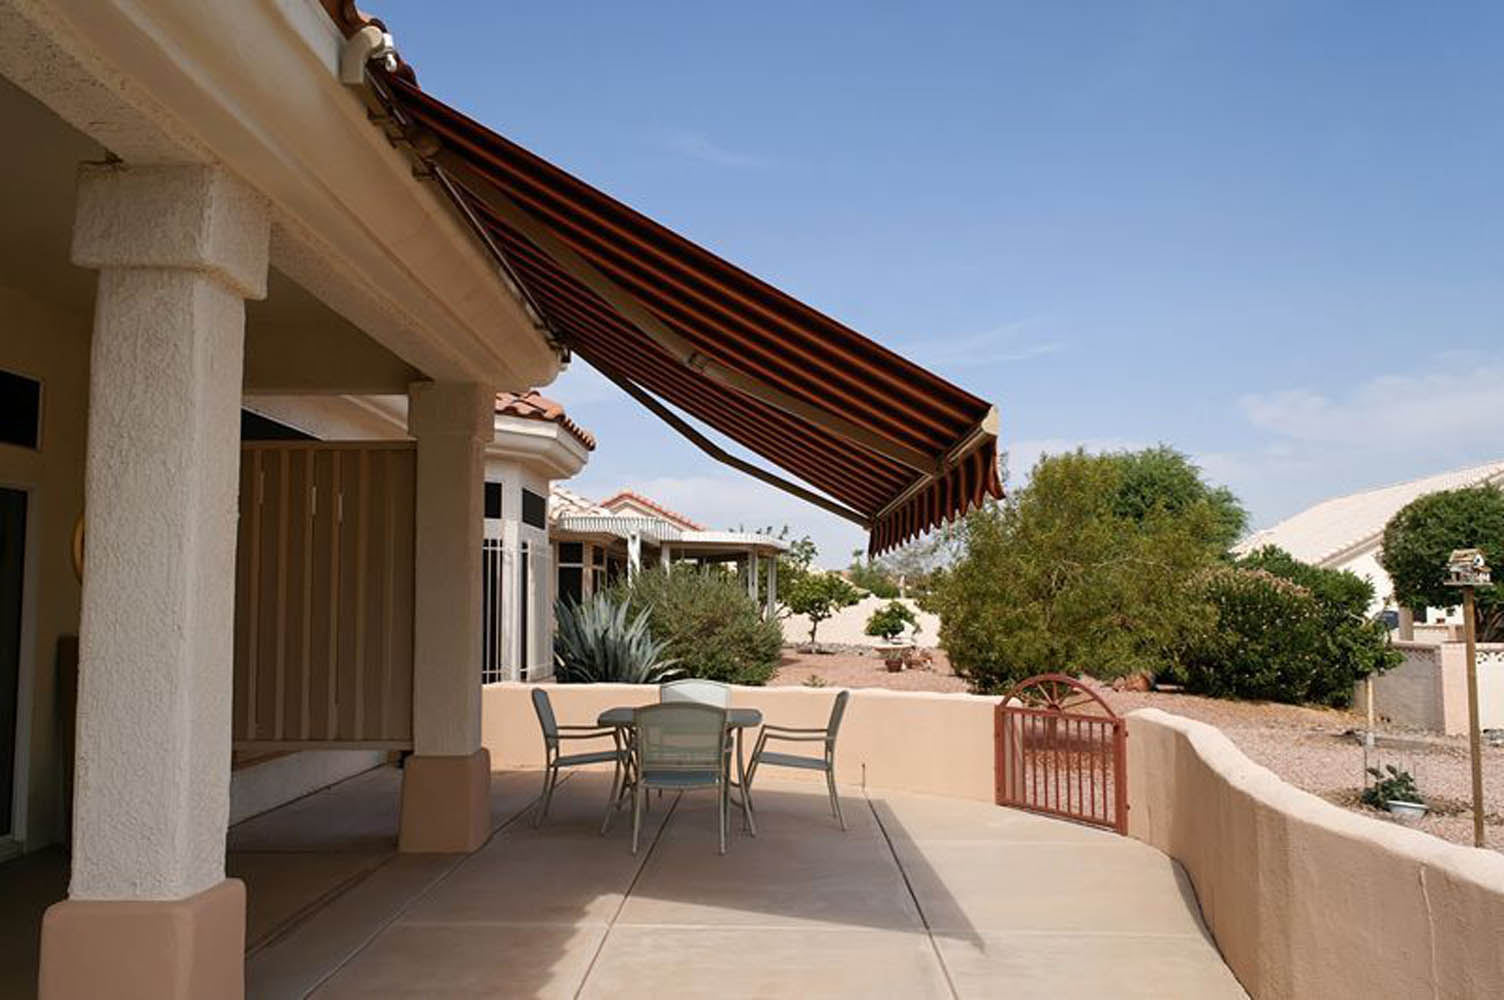 Eclipse Awnings Gallery Photos